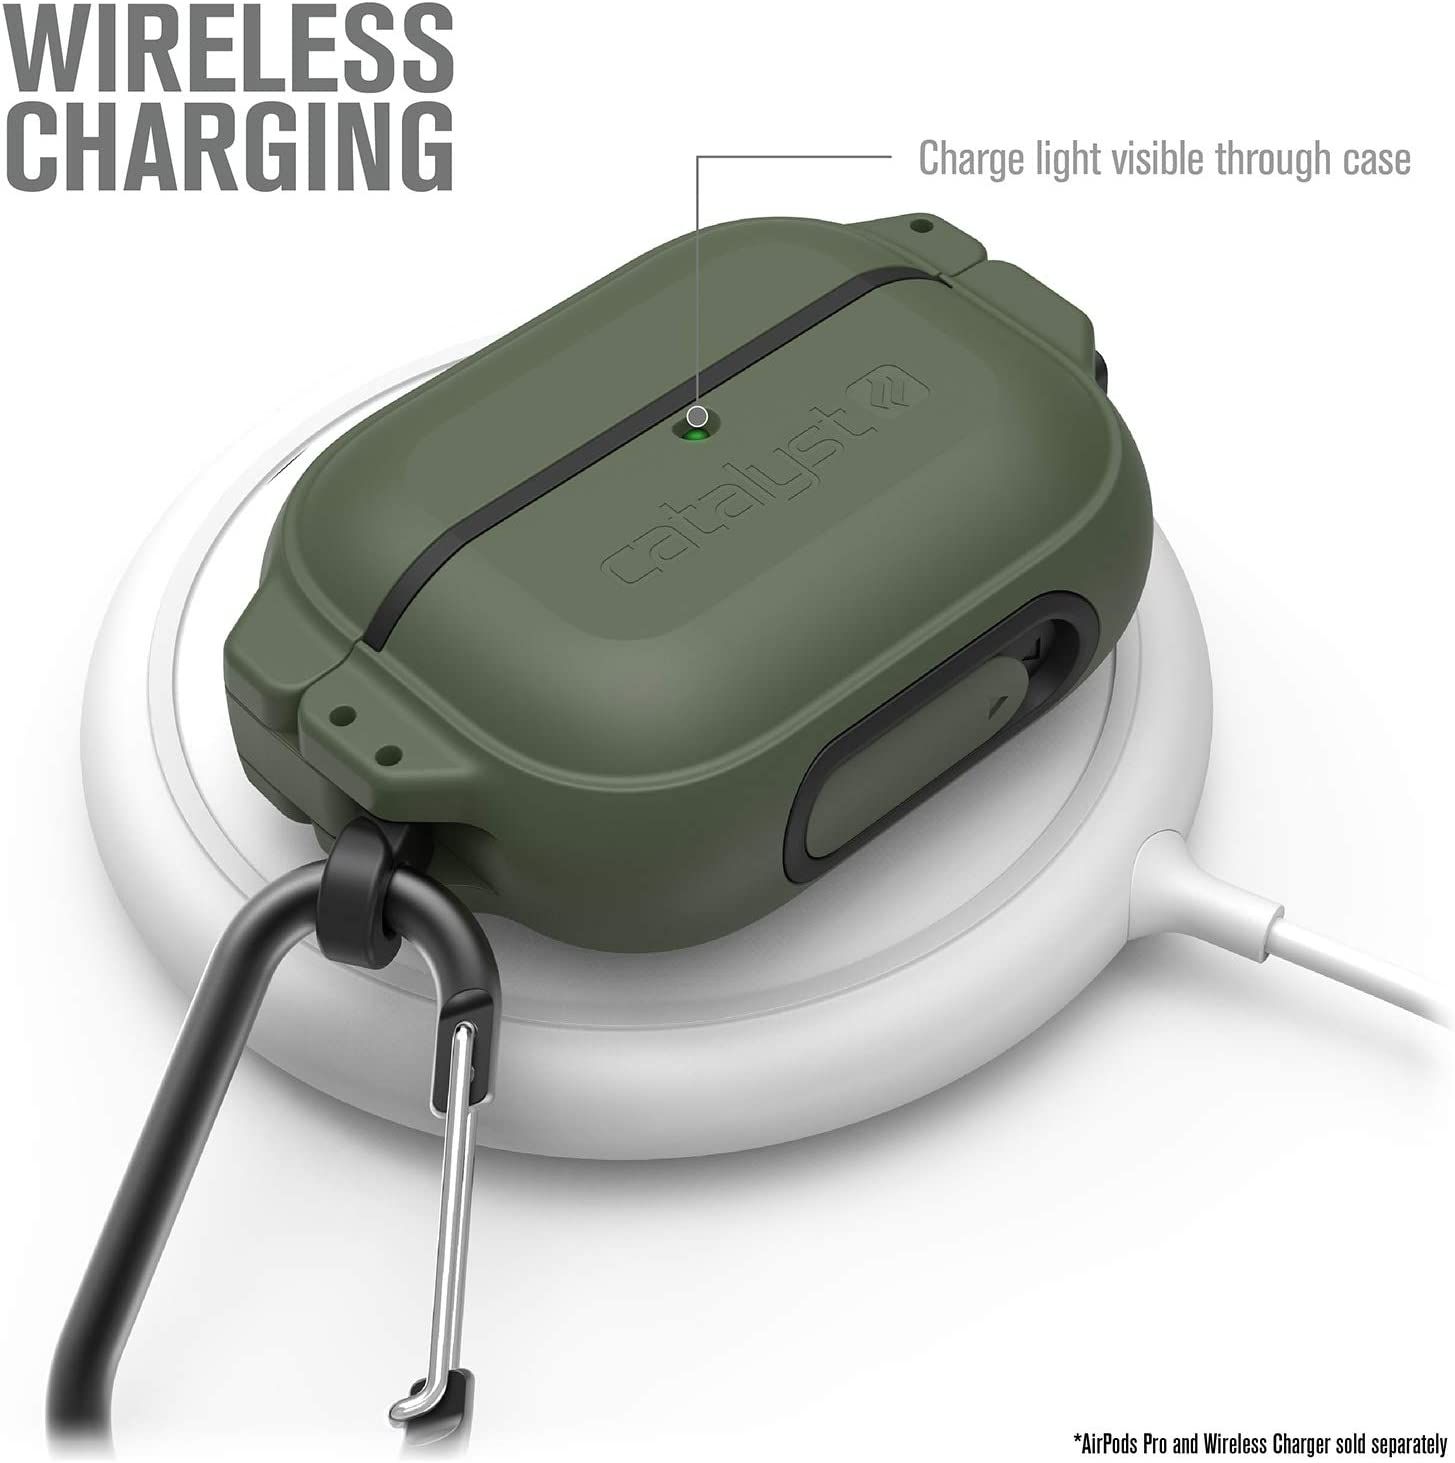 Catalyst Rugged AirPods Pro Case charging